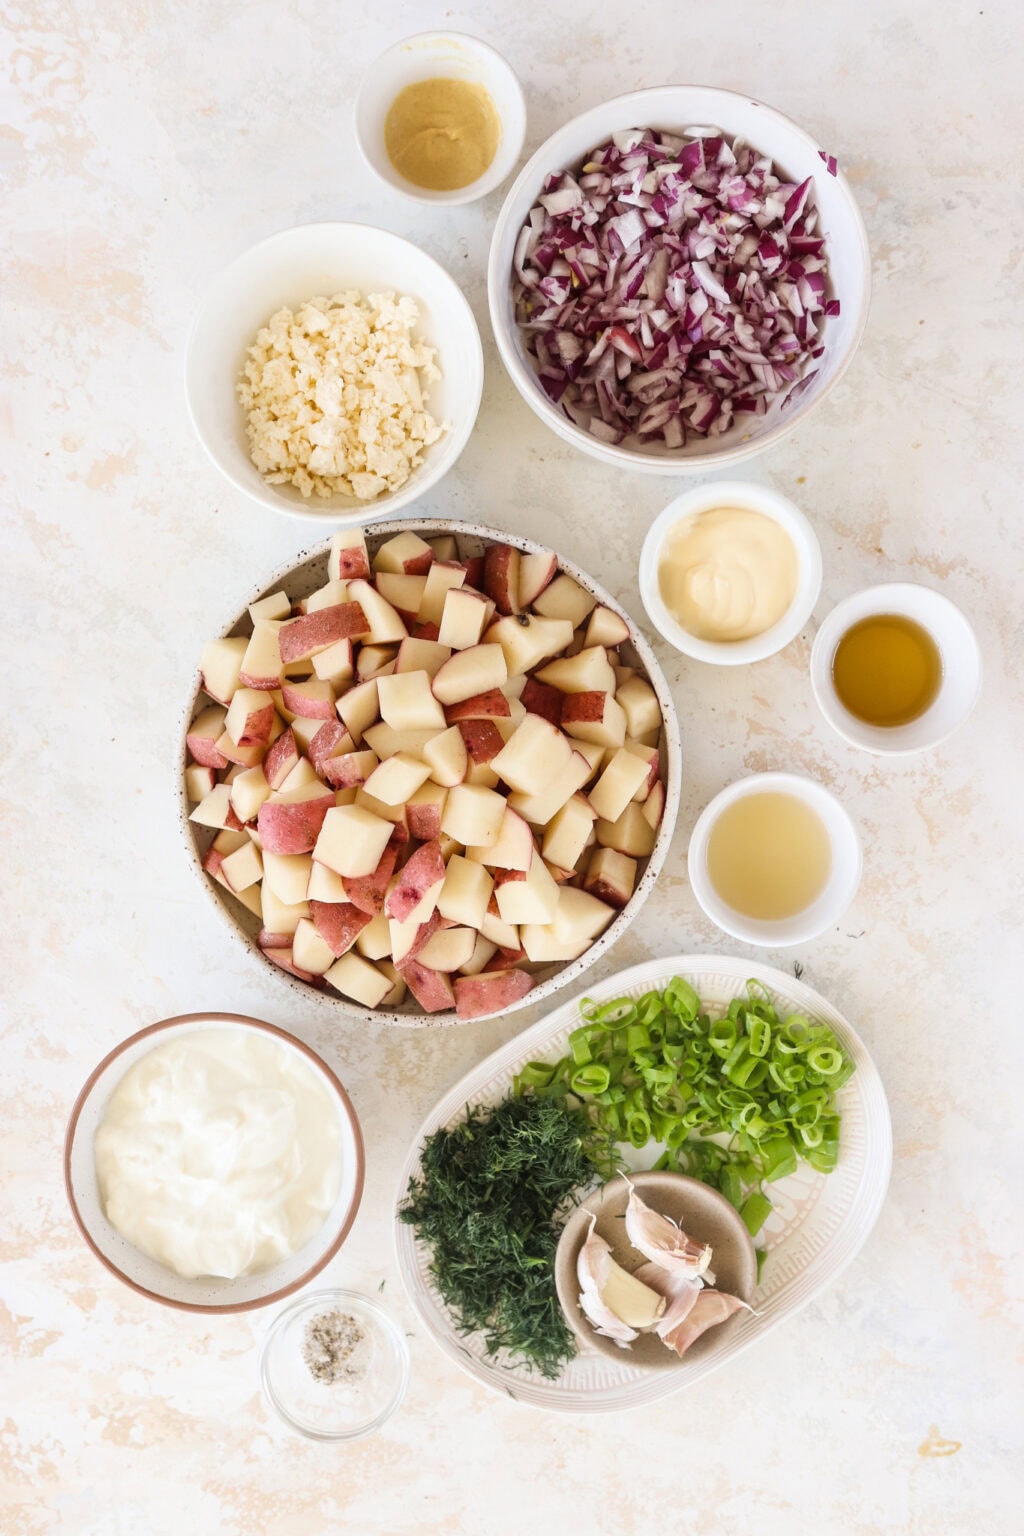 Ingredients for Red Potato Salad with Greek Yogurt Dressing, including red nugget potatoes, red onion, garlic, avocado oil, corn kernels, feta,, fresh dill, salt and pepper to taste, green onion, bacon